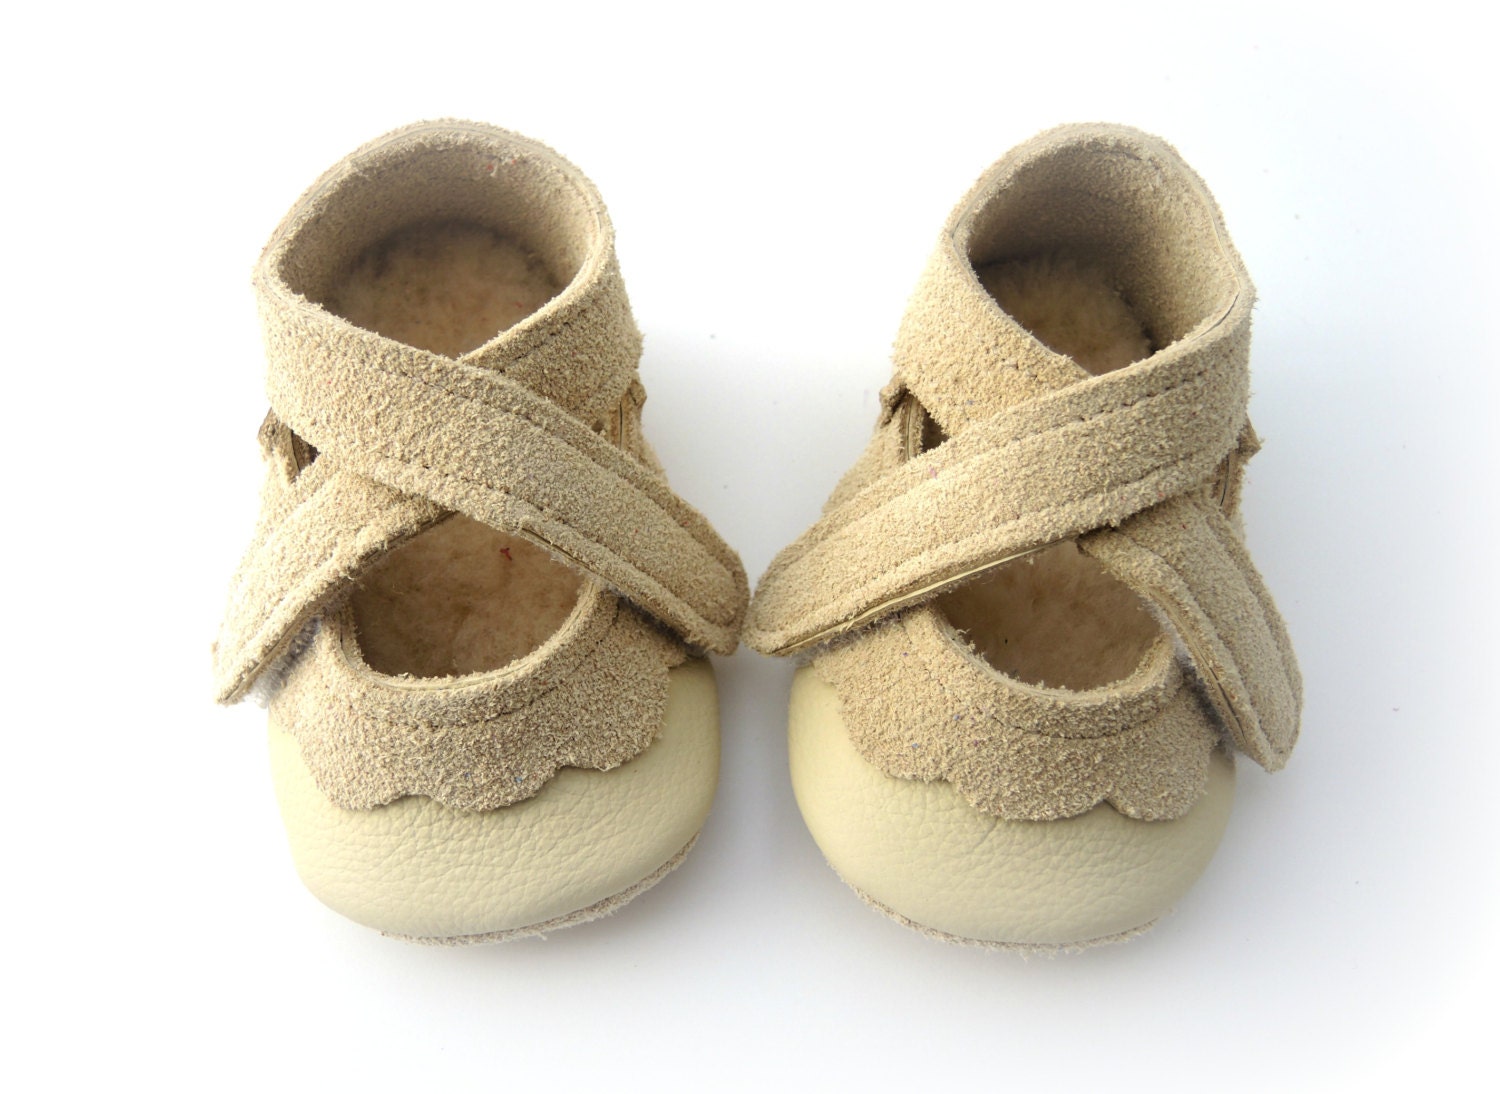 Handmade leather shoes for babies toddlers and children.